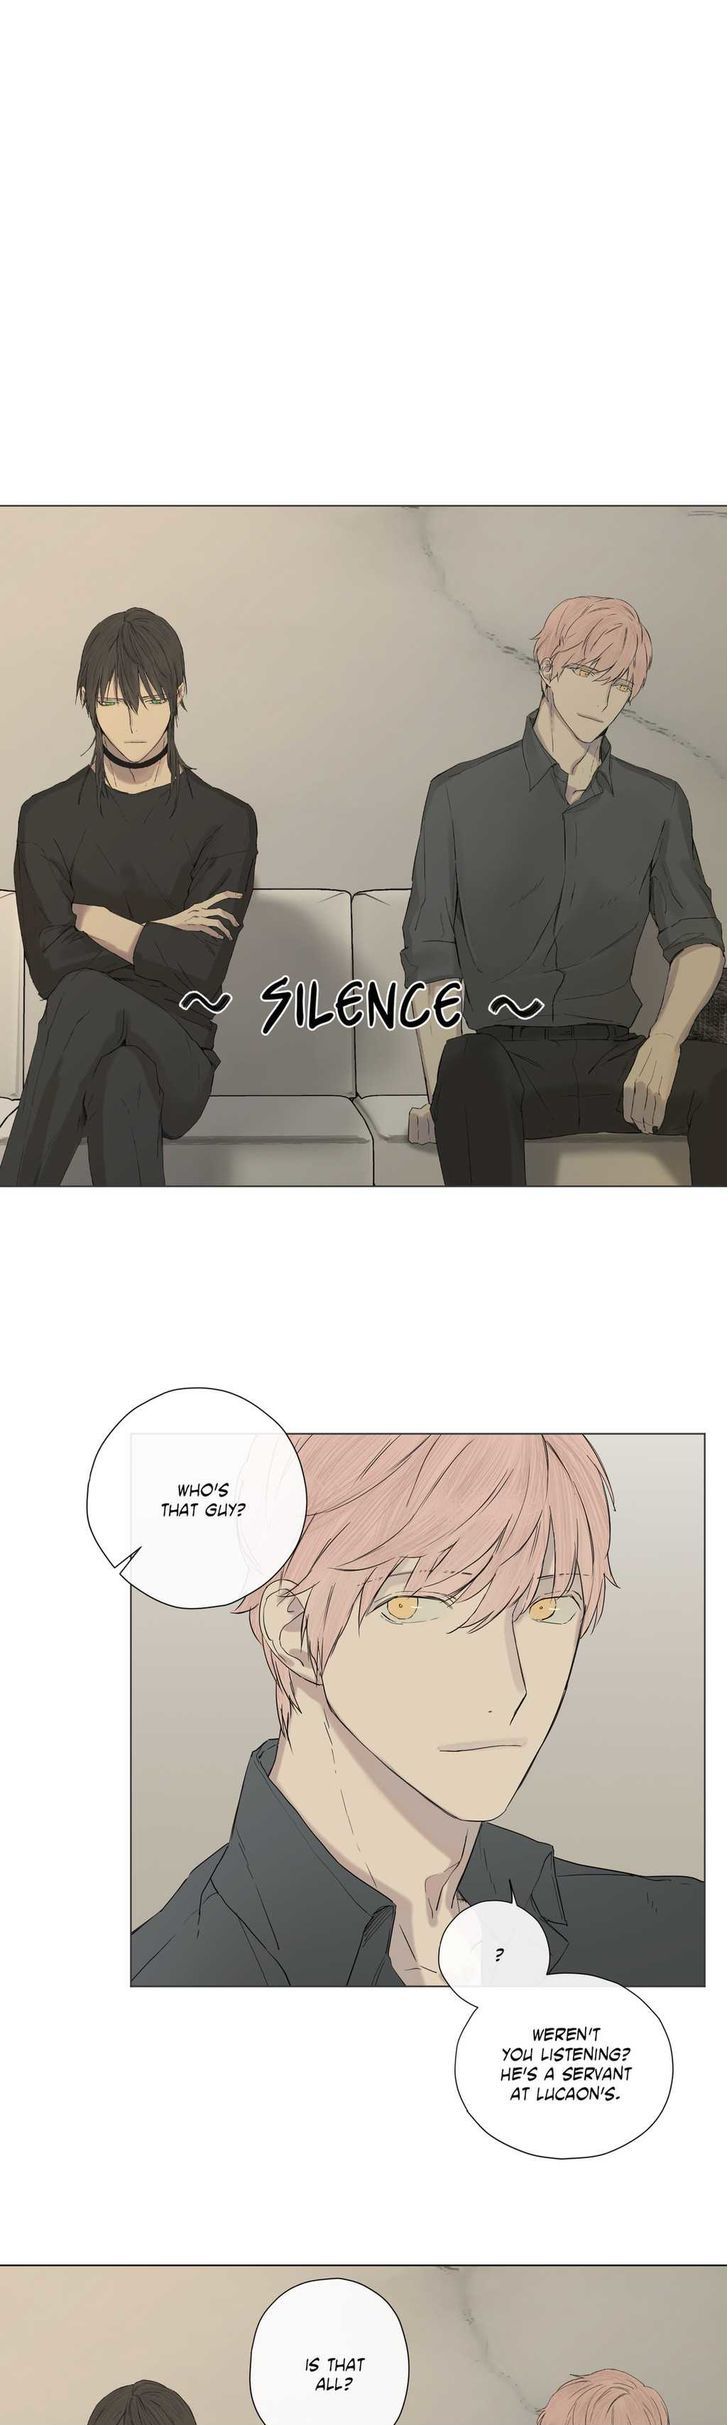 Royal Servant - Chapter 7 Page 2